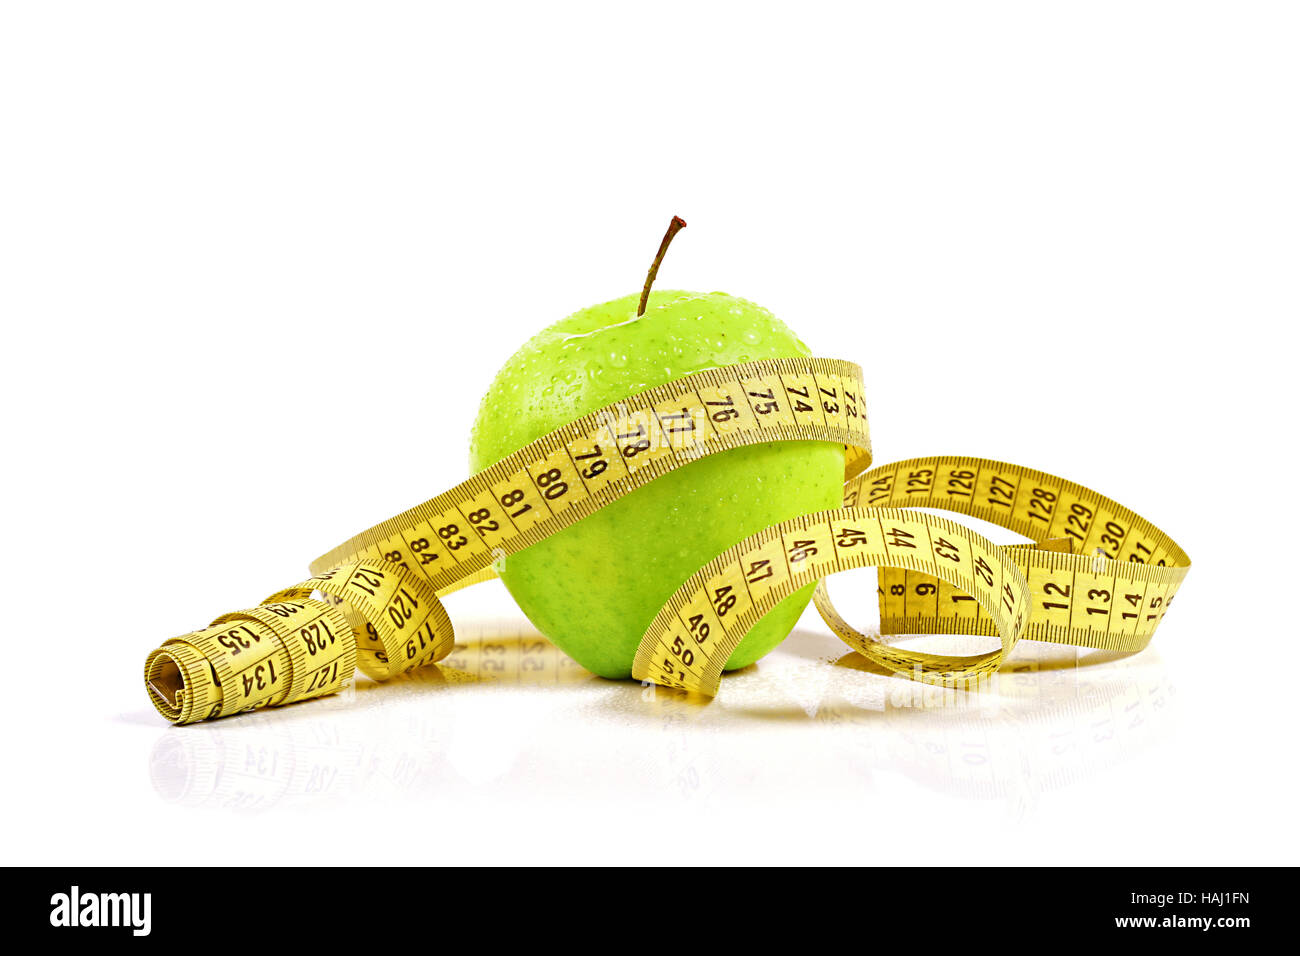 lose weight concept, apple with measuring tape Stock Photo